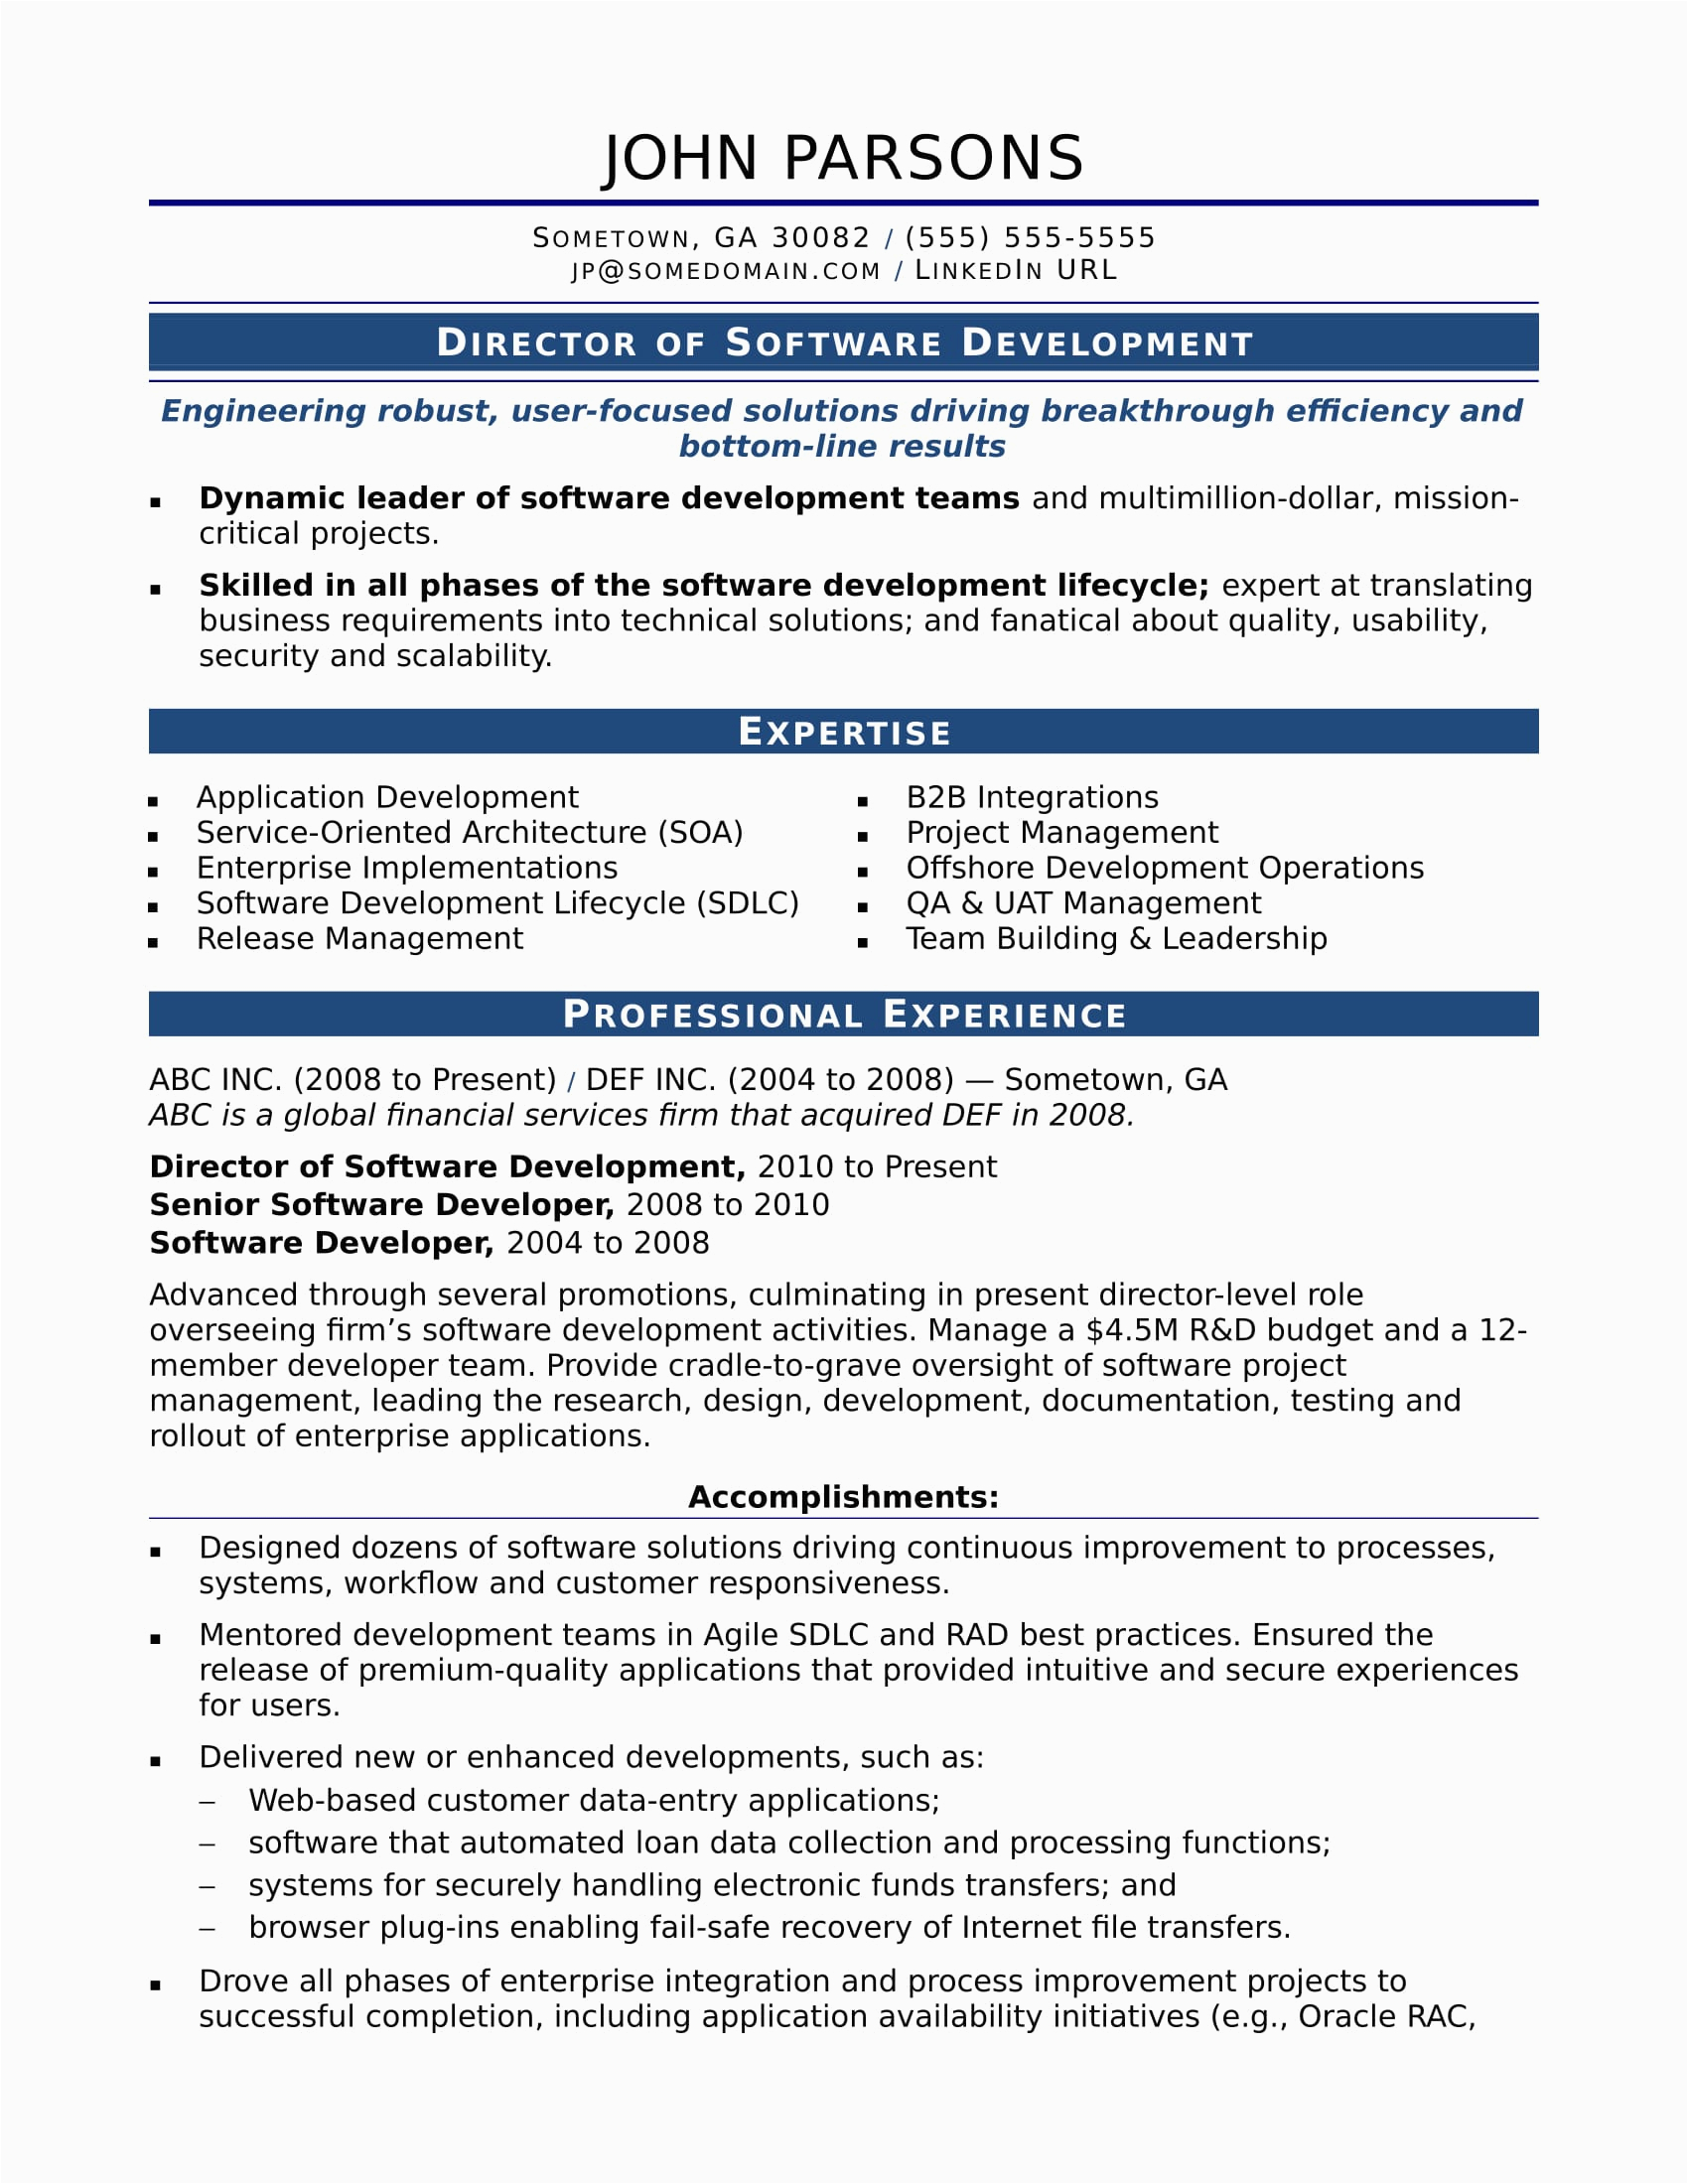 Sample Resume format for Experienced It Professionals Free Download Sample Resume for An Experienced It Developer